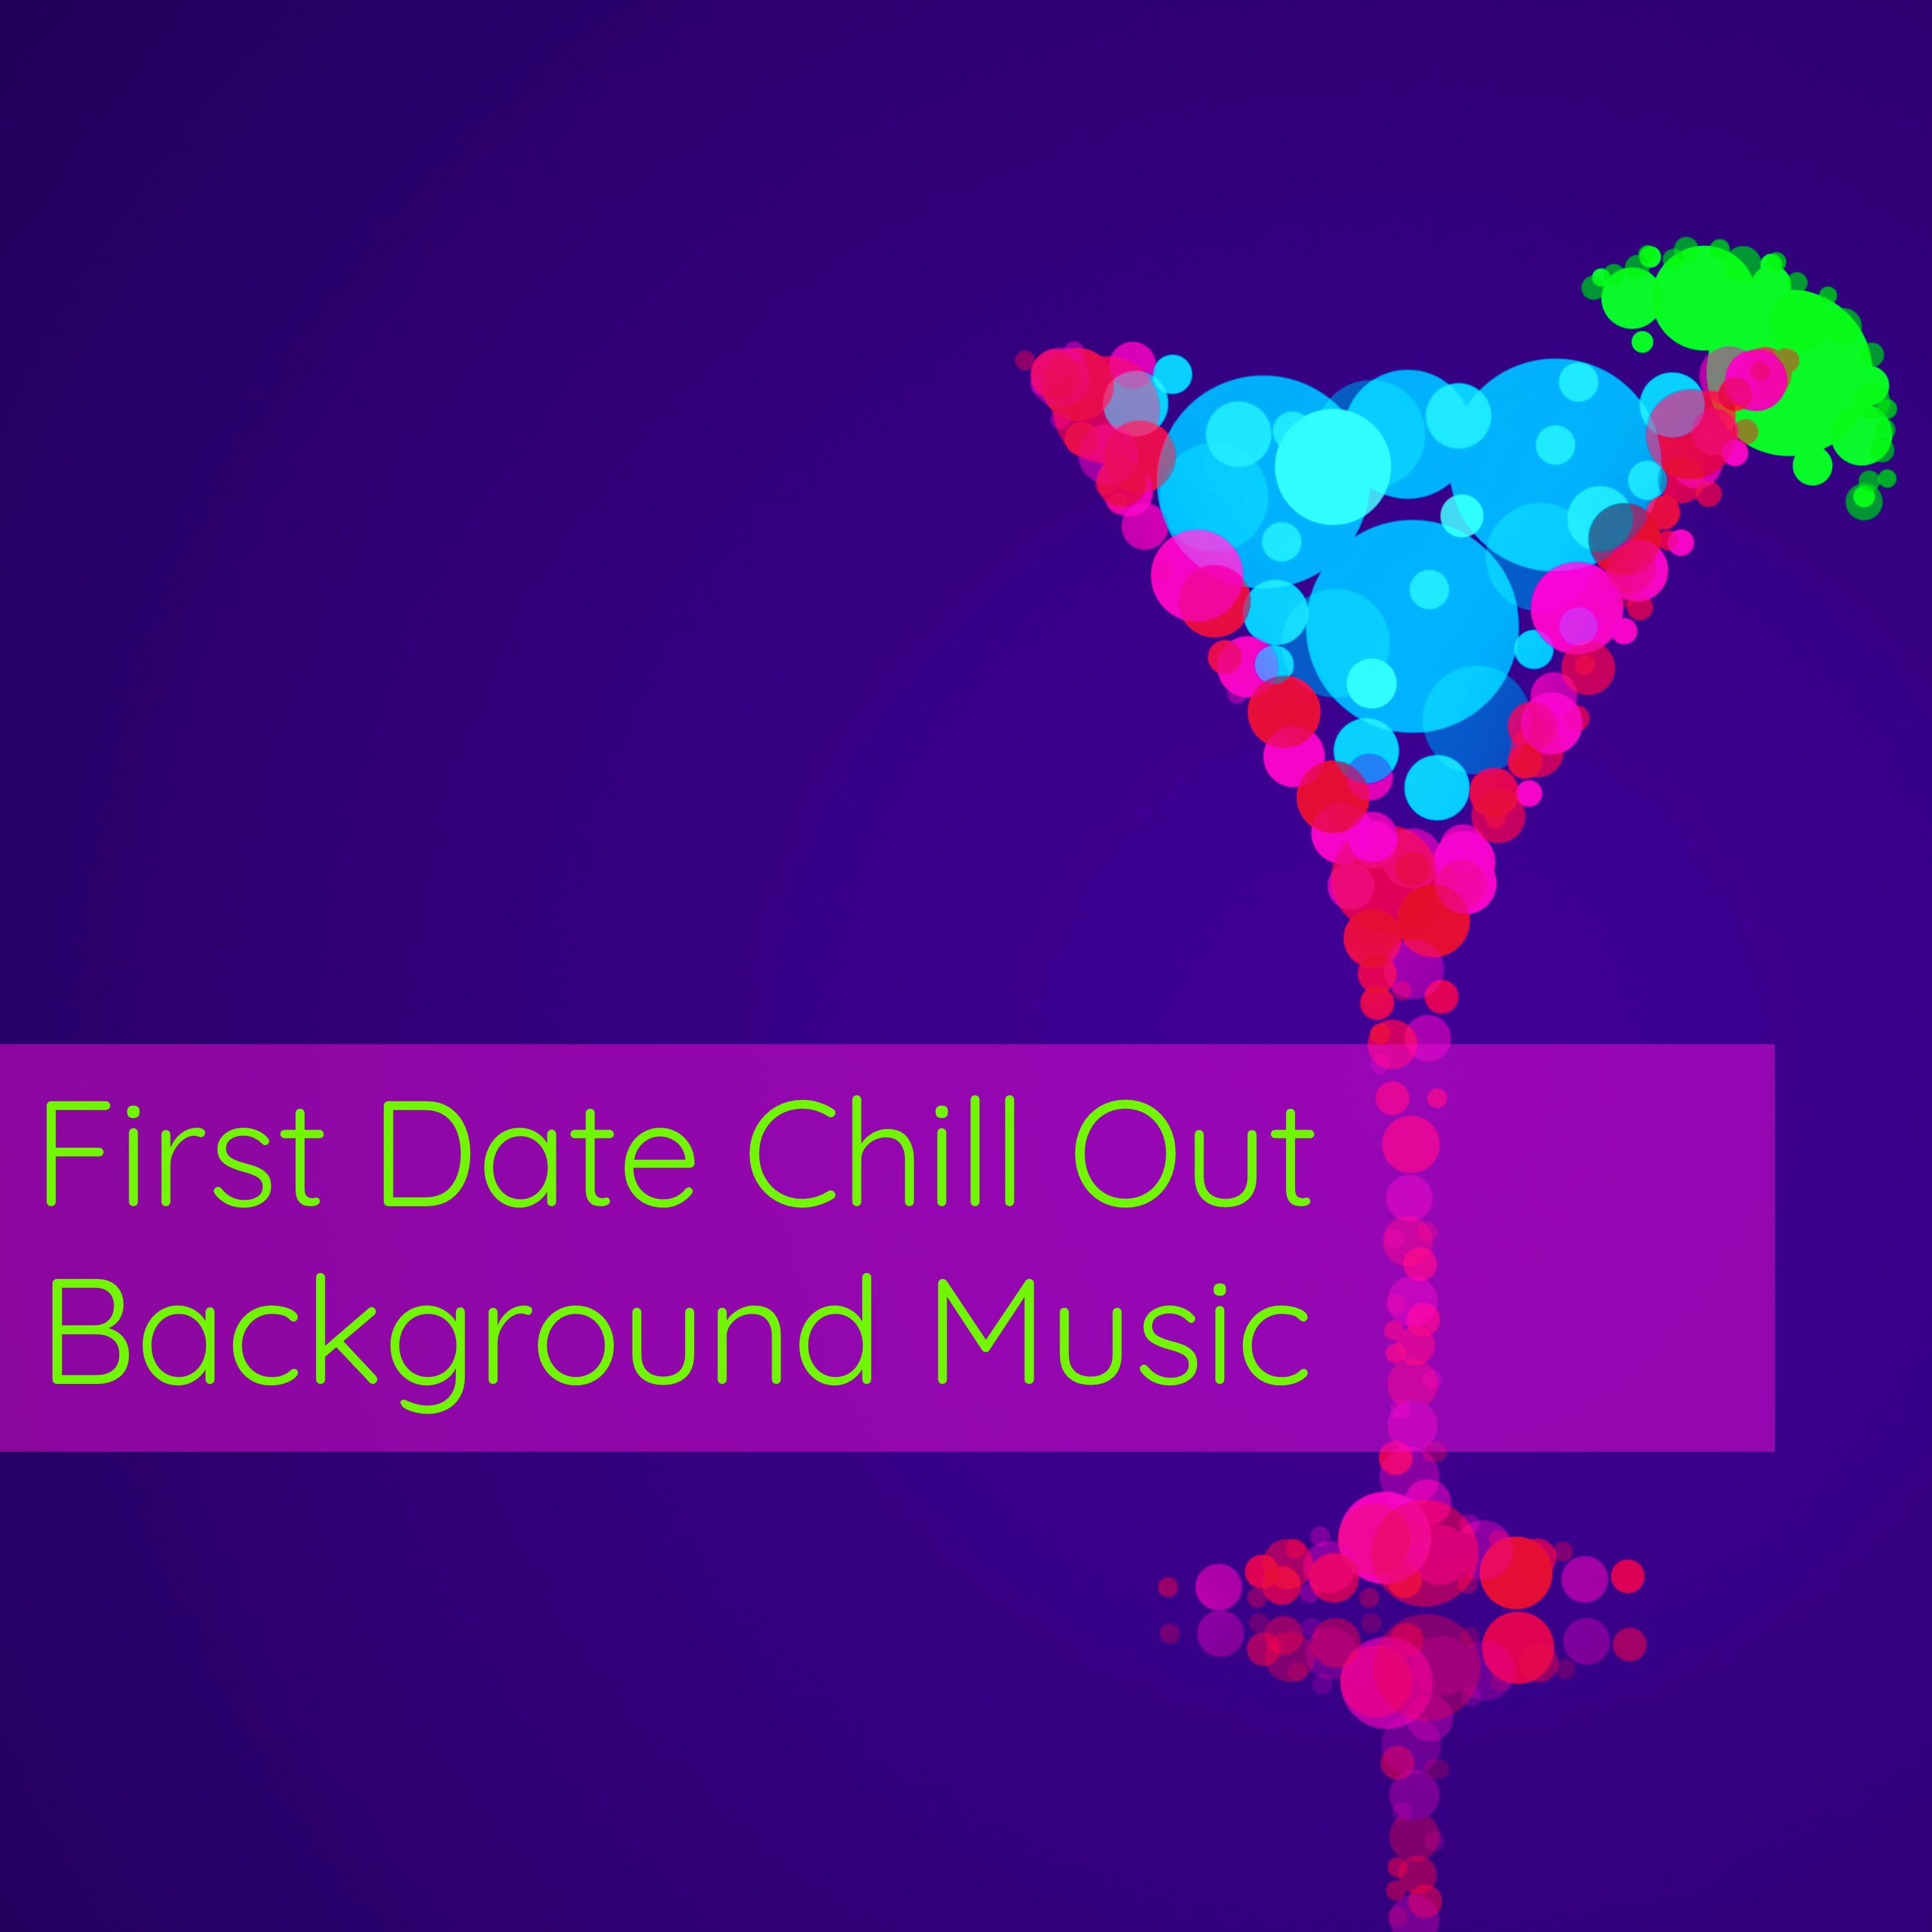 First Date Chill Out Background Music – Background Music for Love